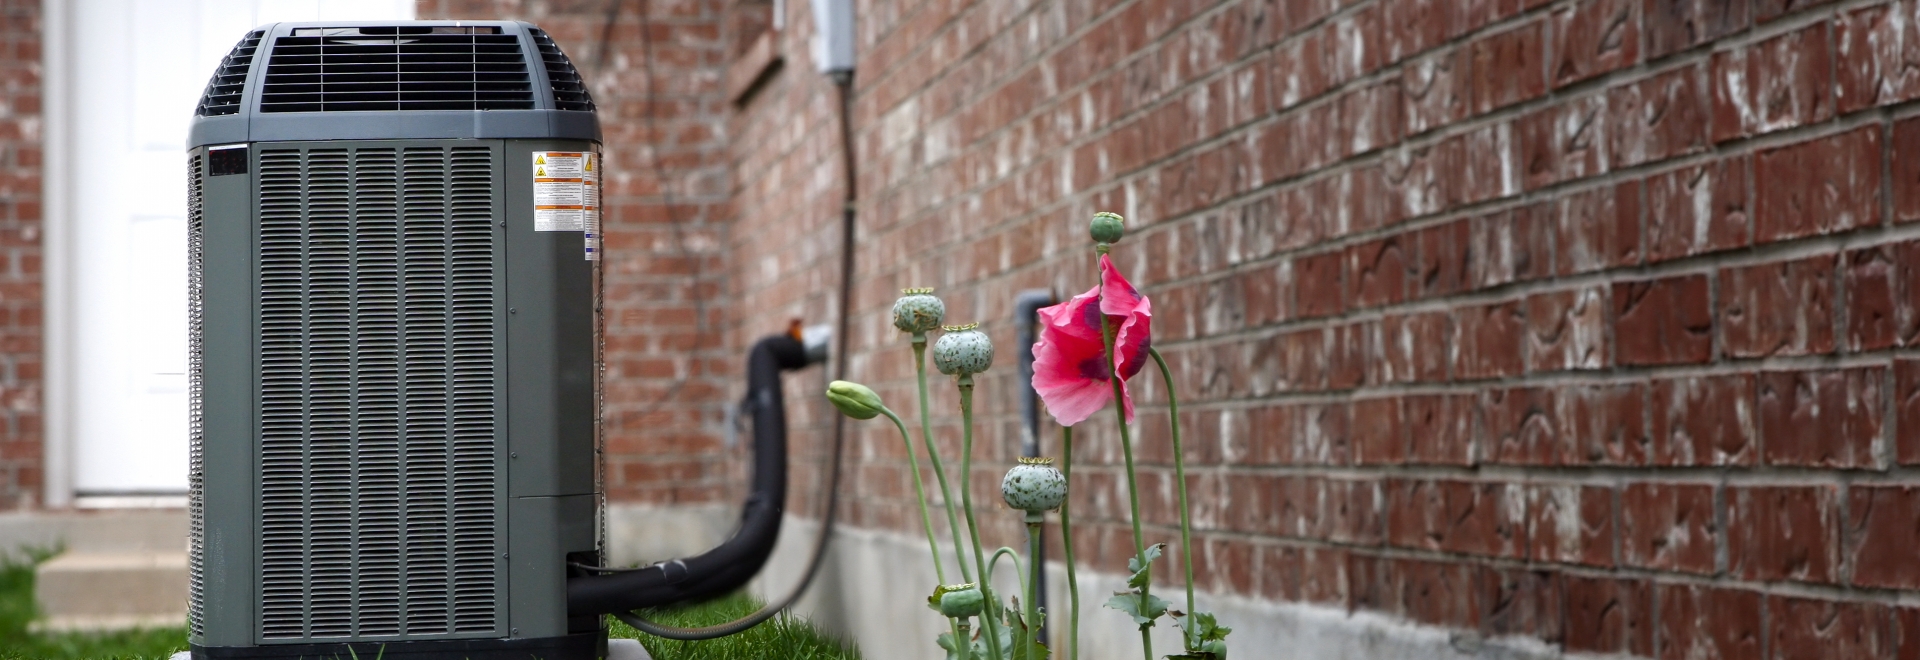 Heat Pump In Back Yard Of Home With a Flower Growing Near It